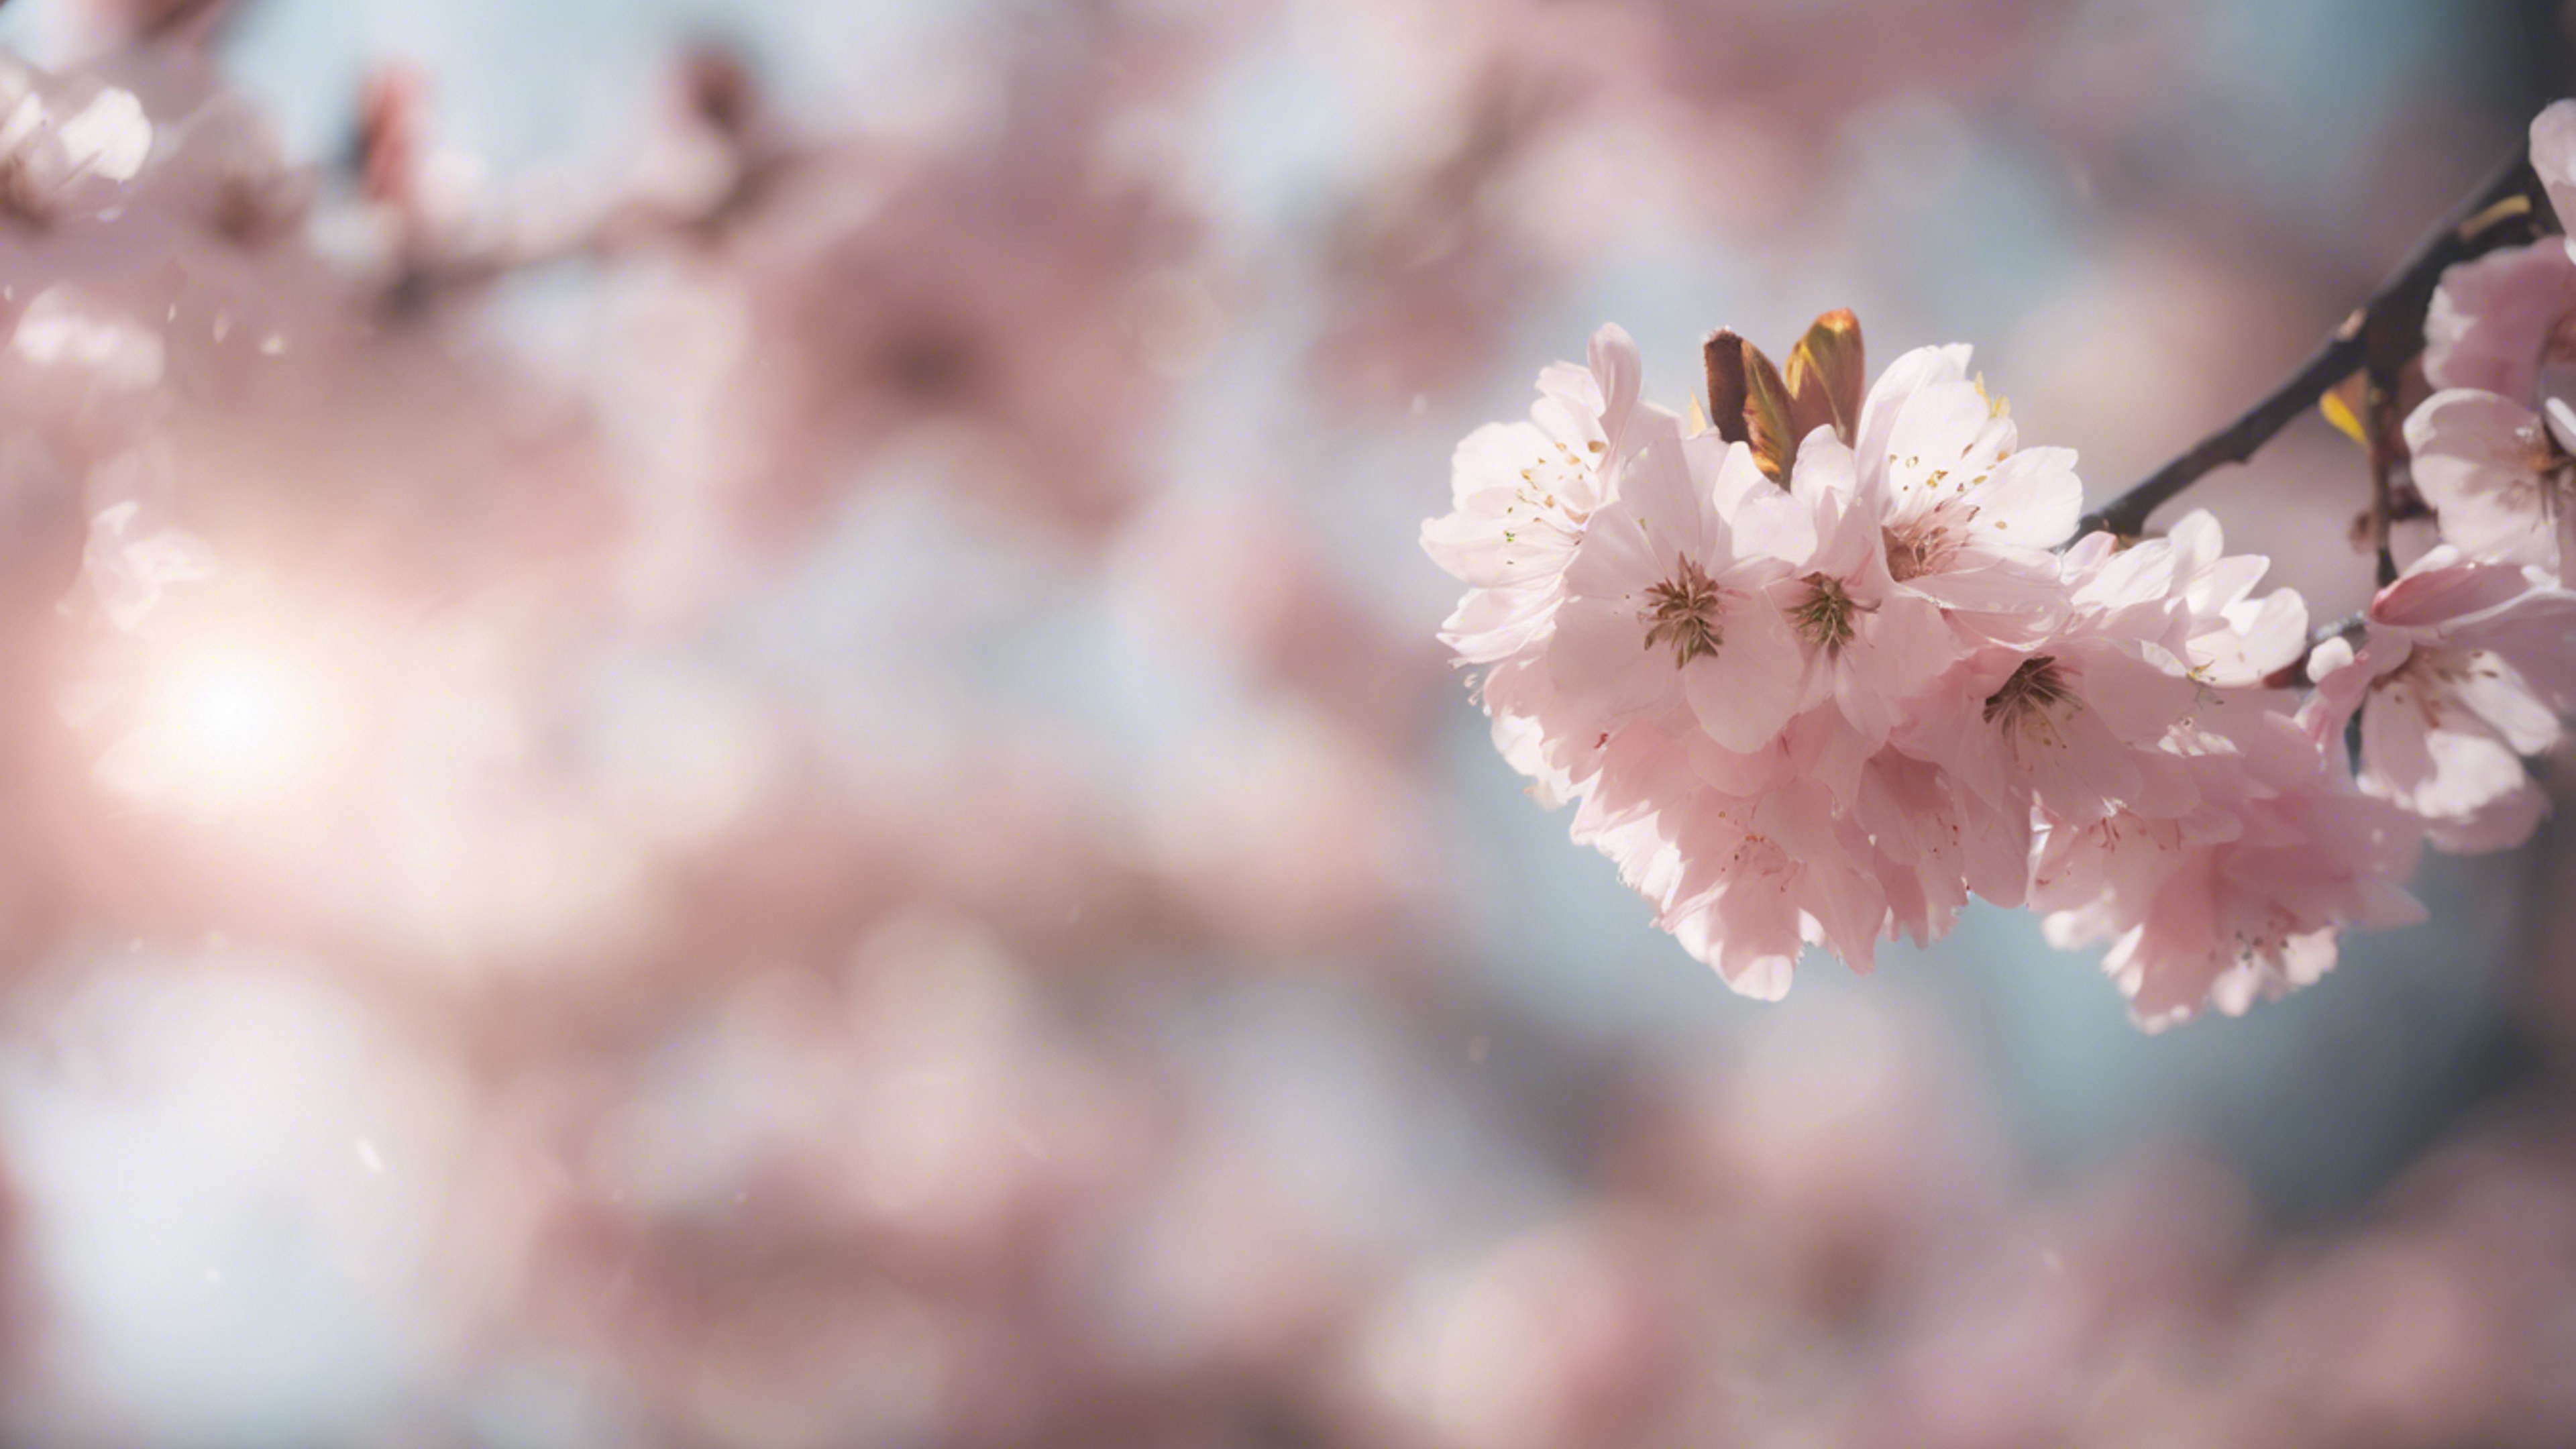 An ethereal dreamscape featuring cherry blossoms wafting in the soft spring breeze. Wallpaper[9de2e4f1deeb467ebab6]